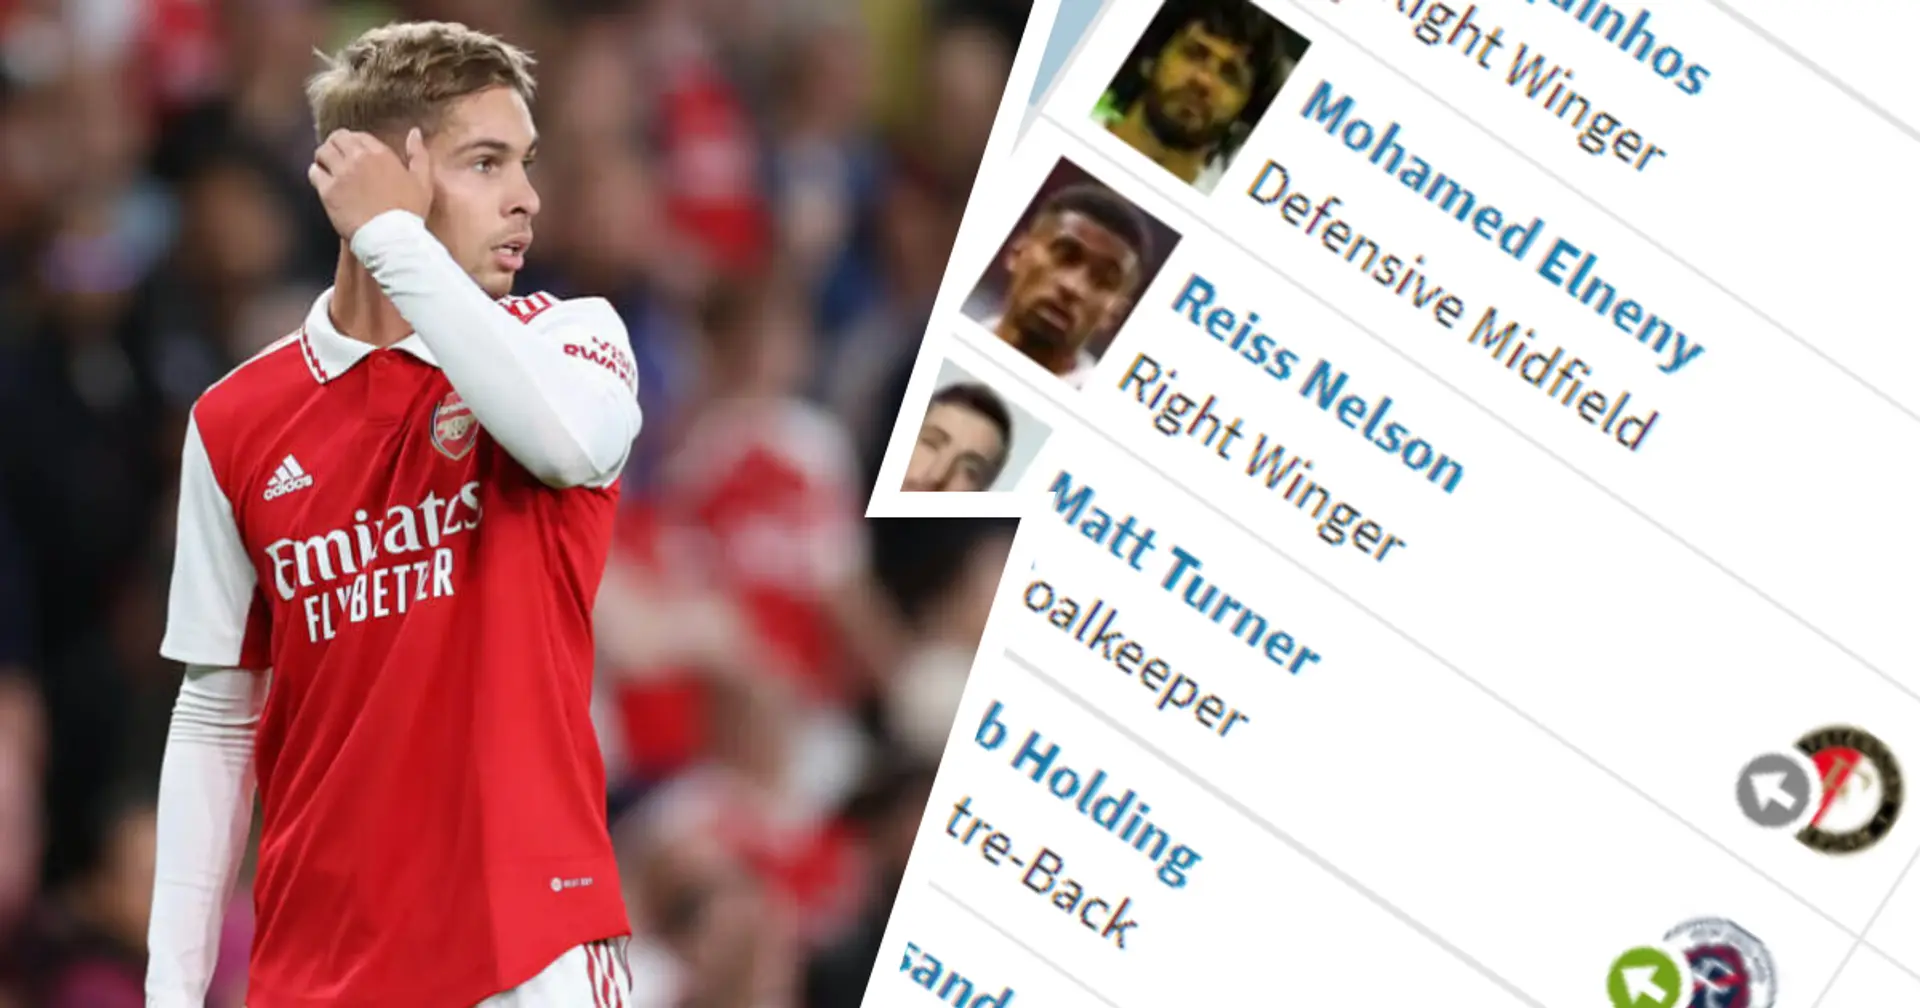 Smith Rowe, Elneny & more: Arsenal players with least minutes played so far this season